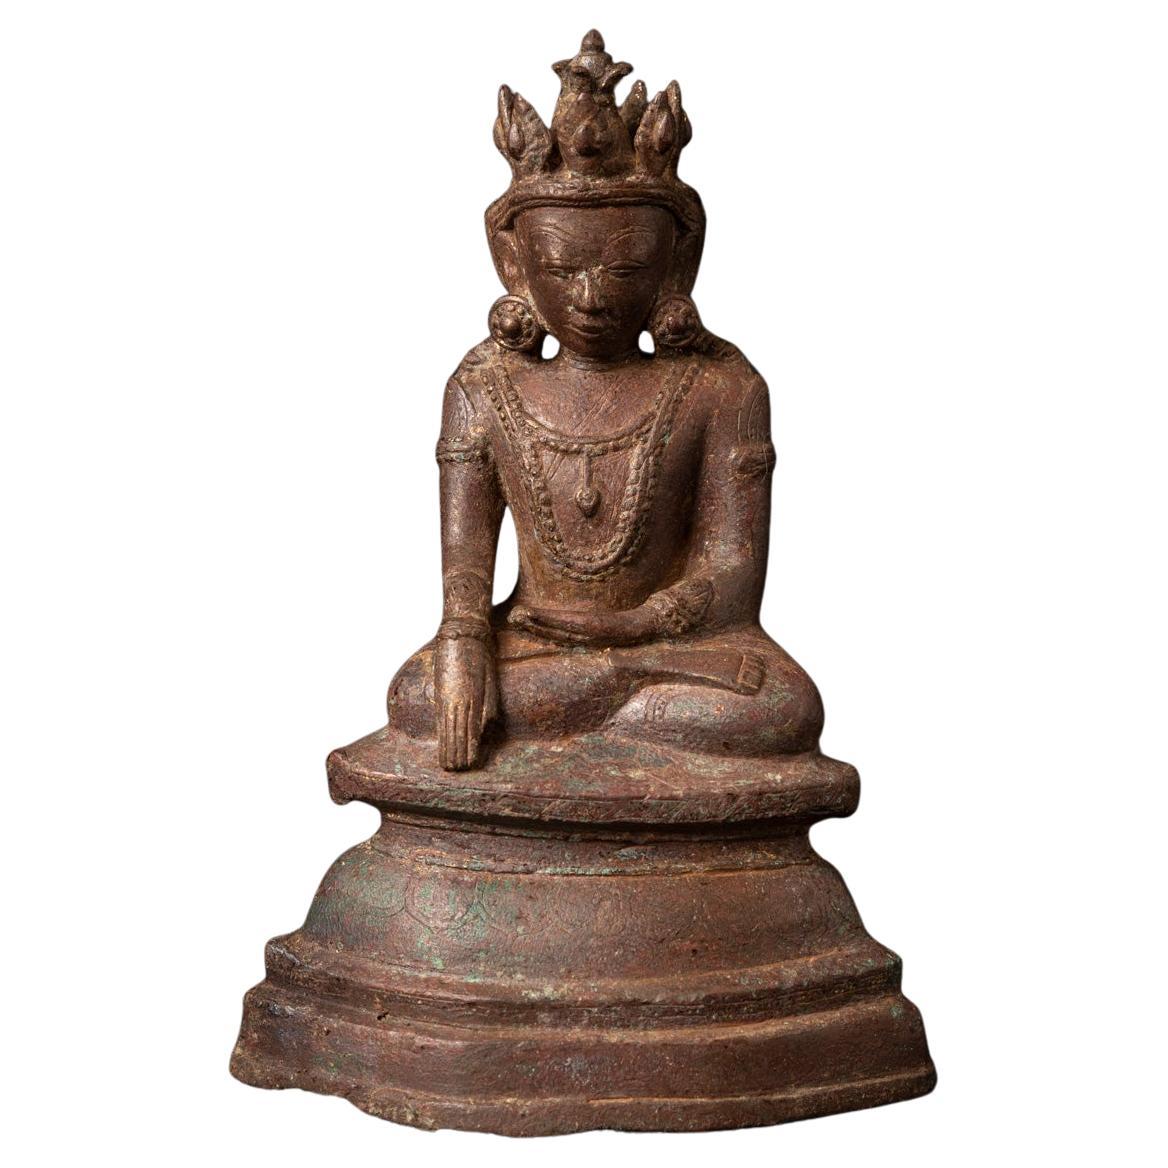 14-15th century Special Antique Bronze Arakan Buddha Statue from Burma For Sale